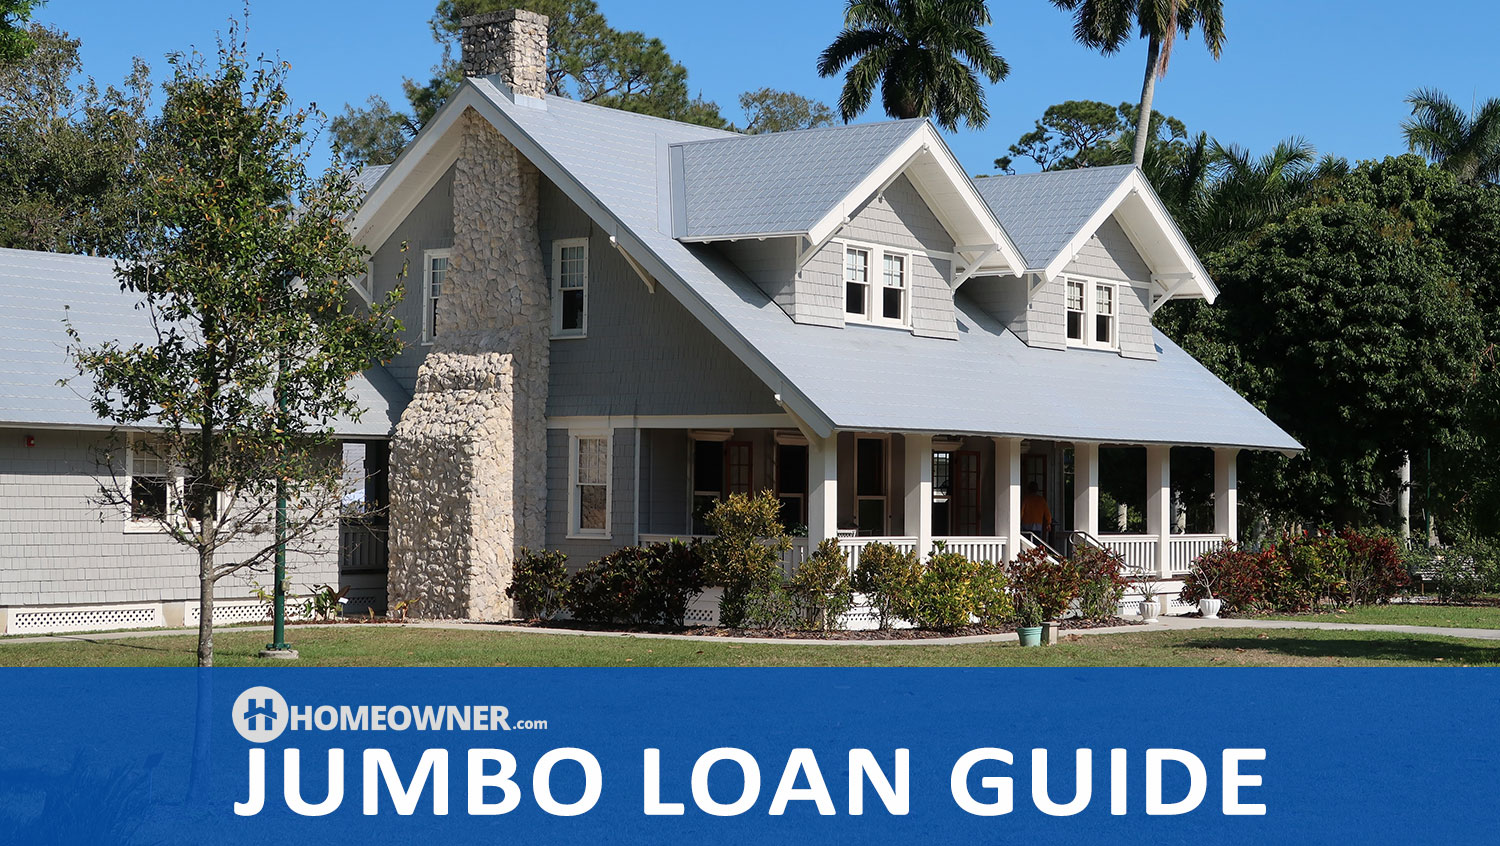 How To Qualify for a Jumbo Loan